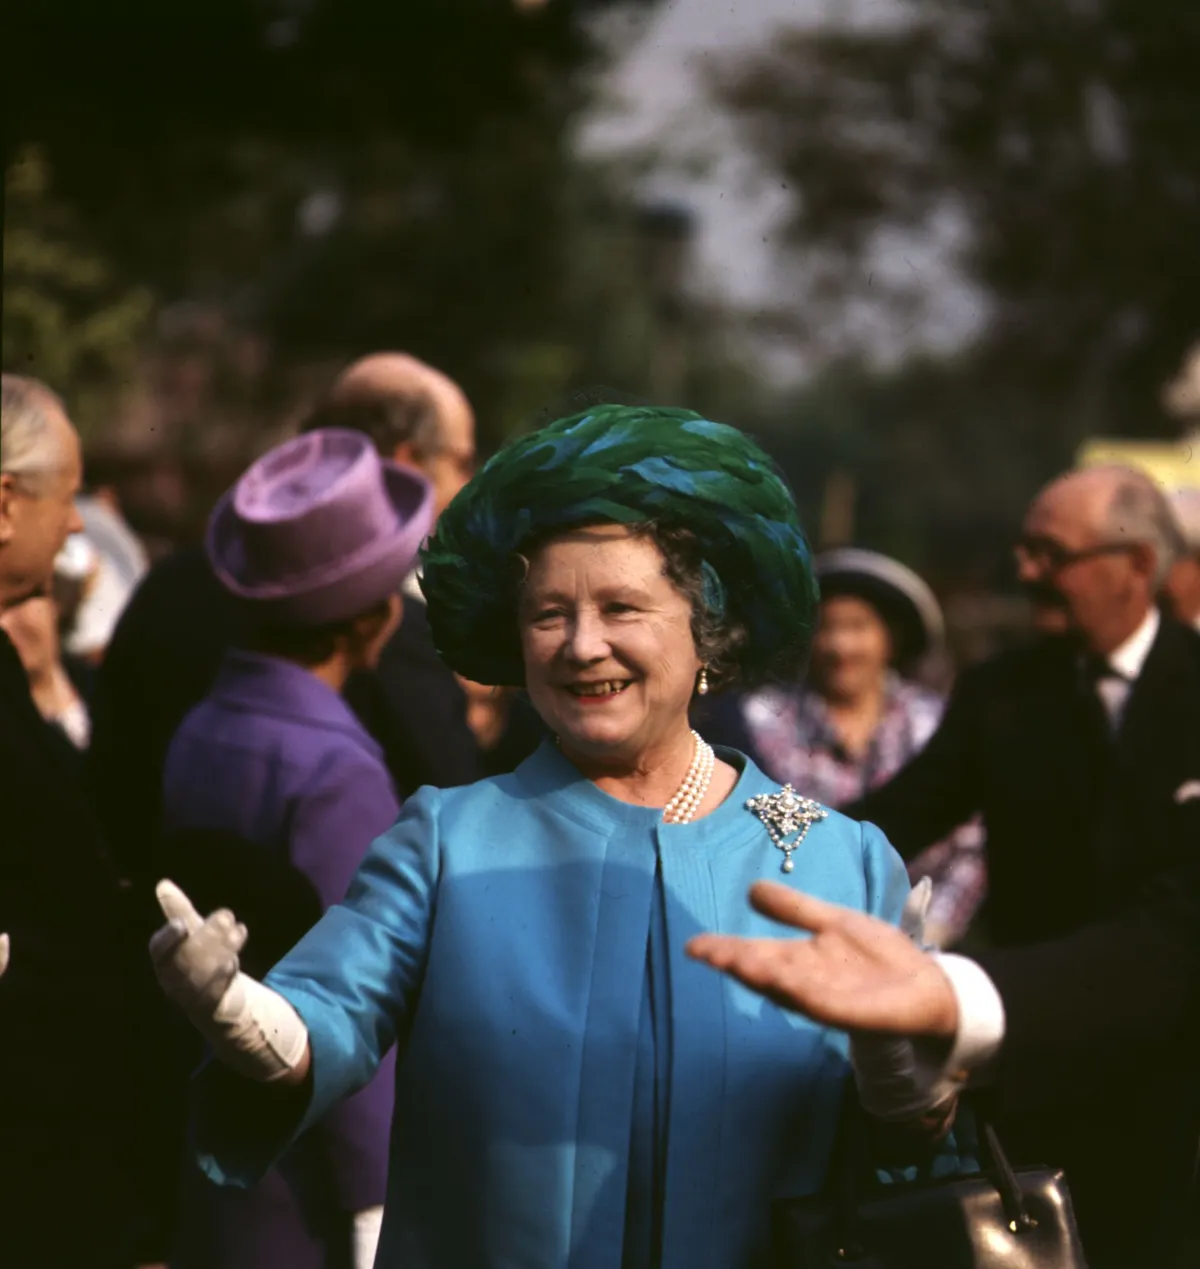 May 1971: Queen Elizabeth The Queen Mother during a visit to the Chelsea Flower Show